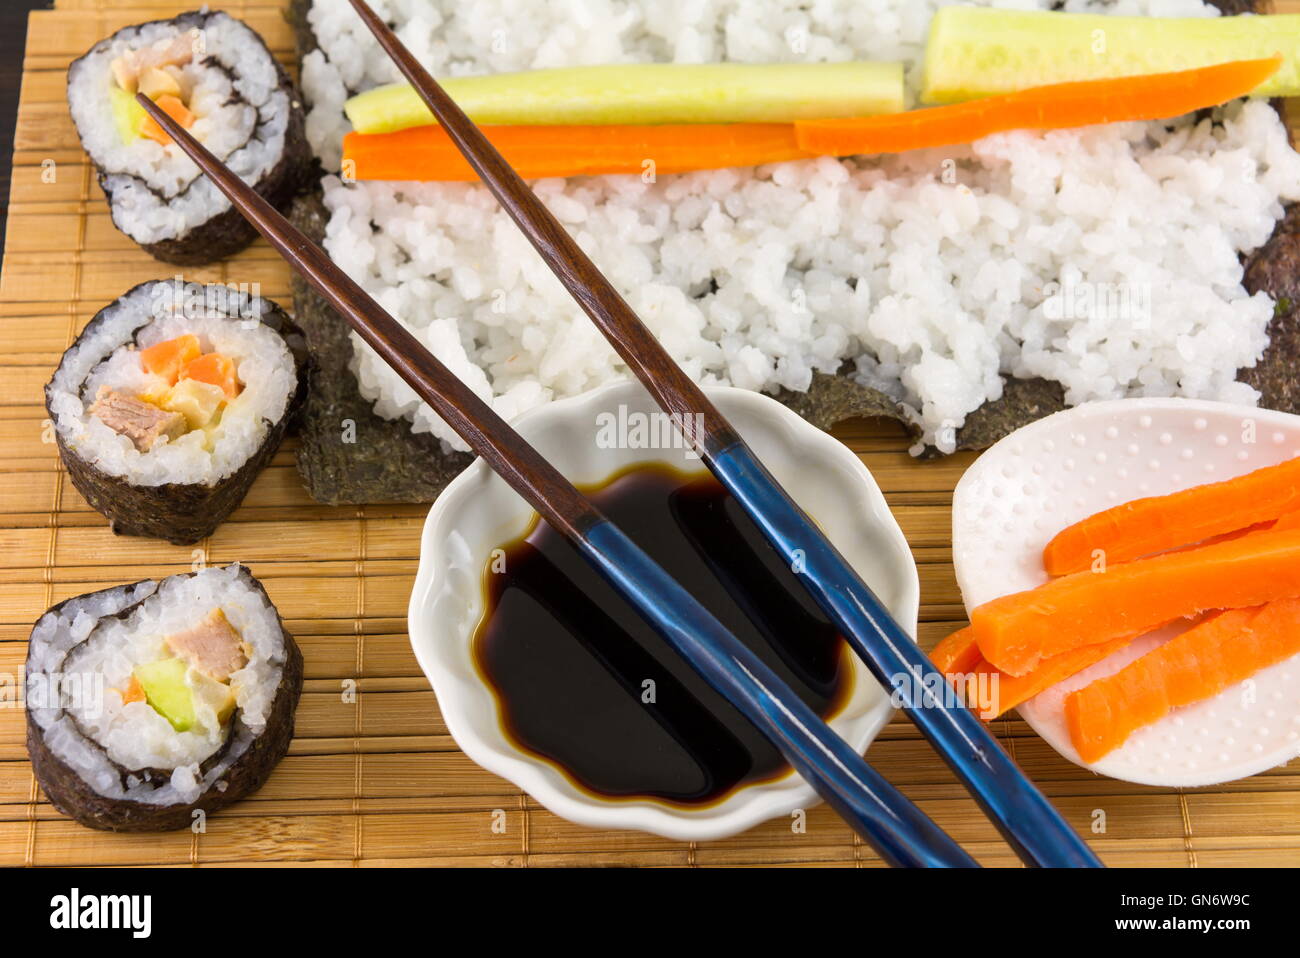 https://c8.alamy.com/comp/GN6W9C/preparing-sushi-sushi-ingredients-and-made-sushi-rolls-GN6W9C.jpg